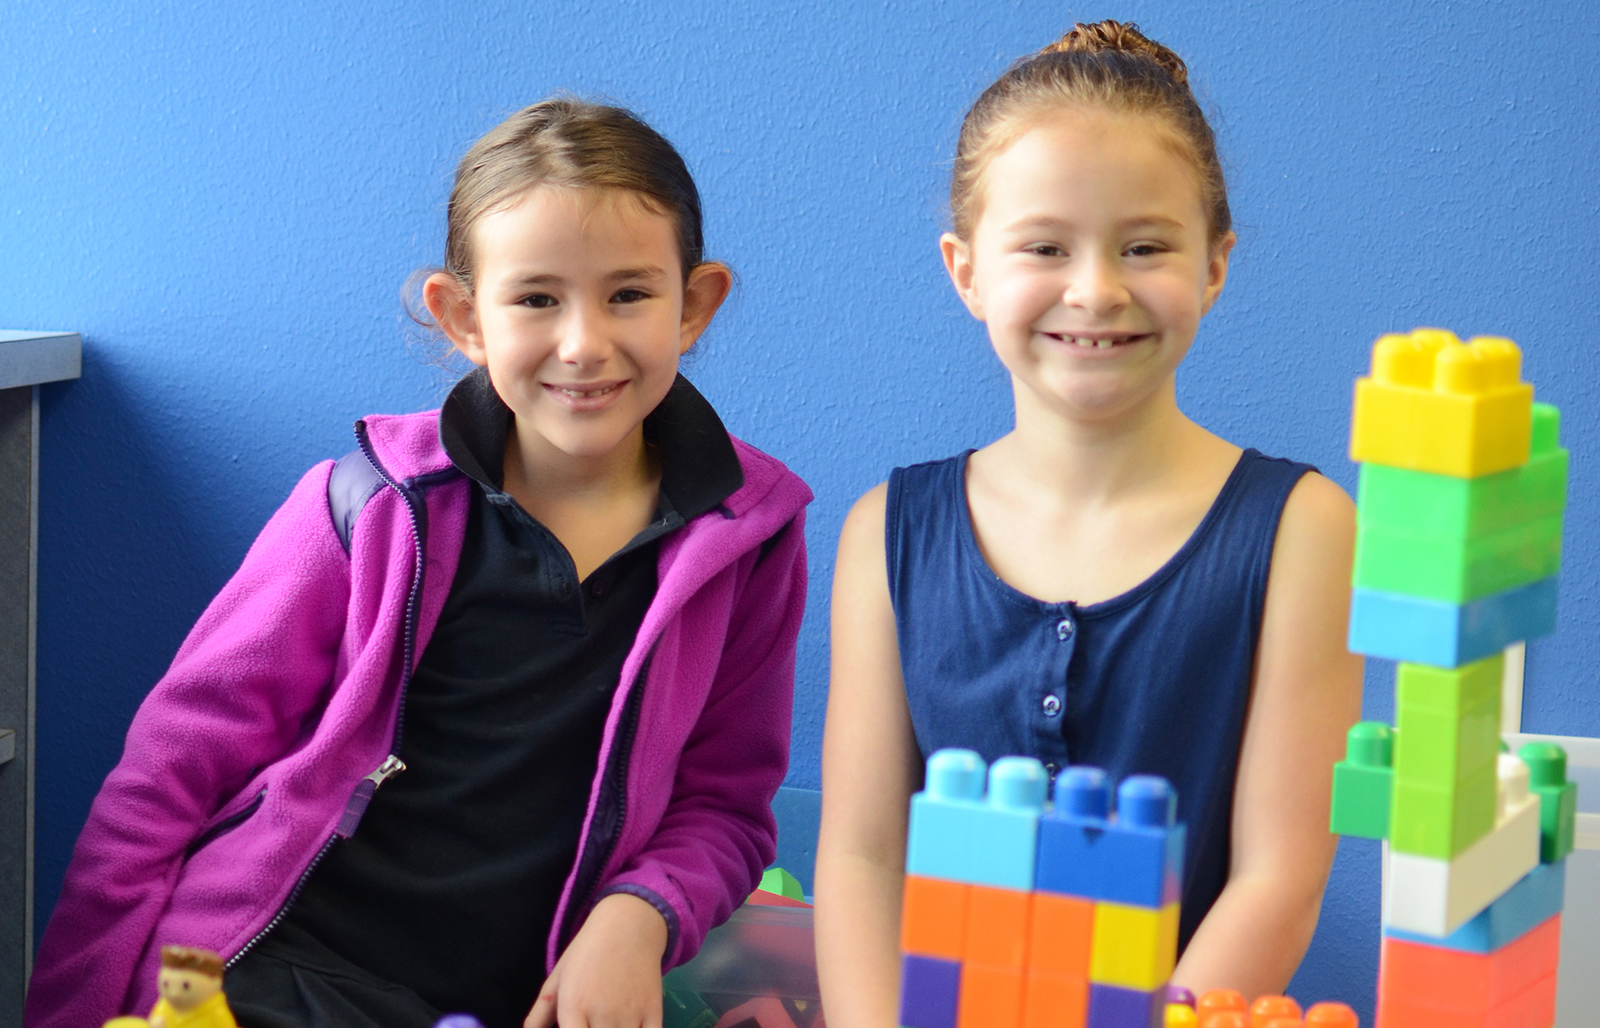 Texas Scottish Rite Hospital for Children patients smiling while playing with blocks